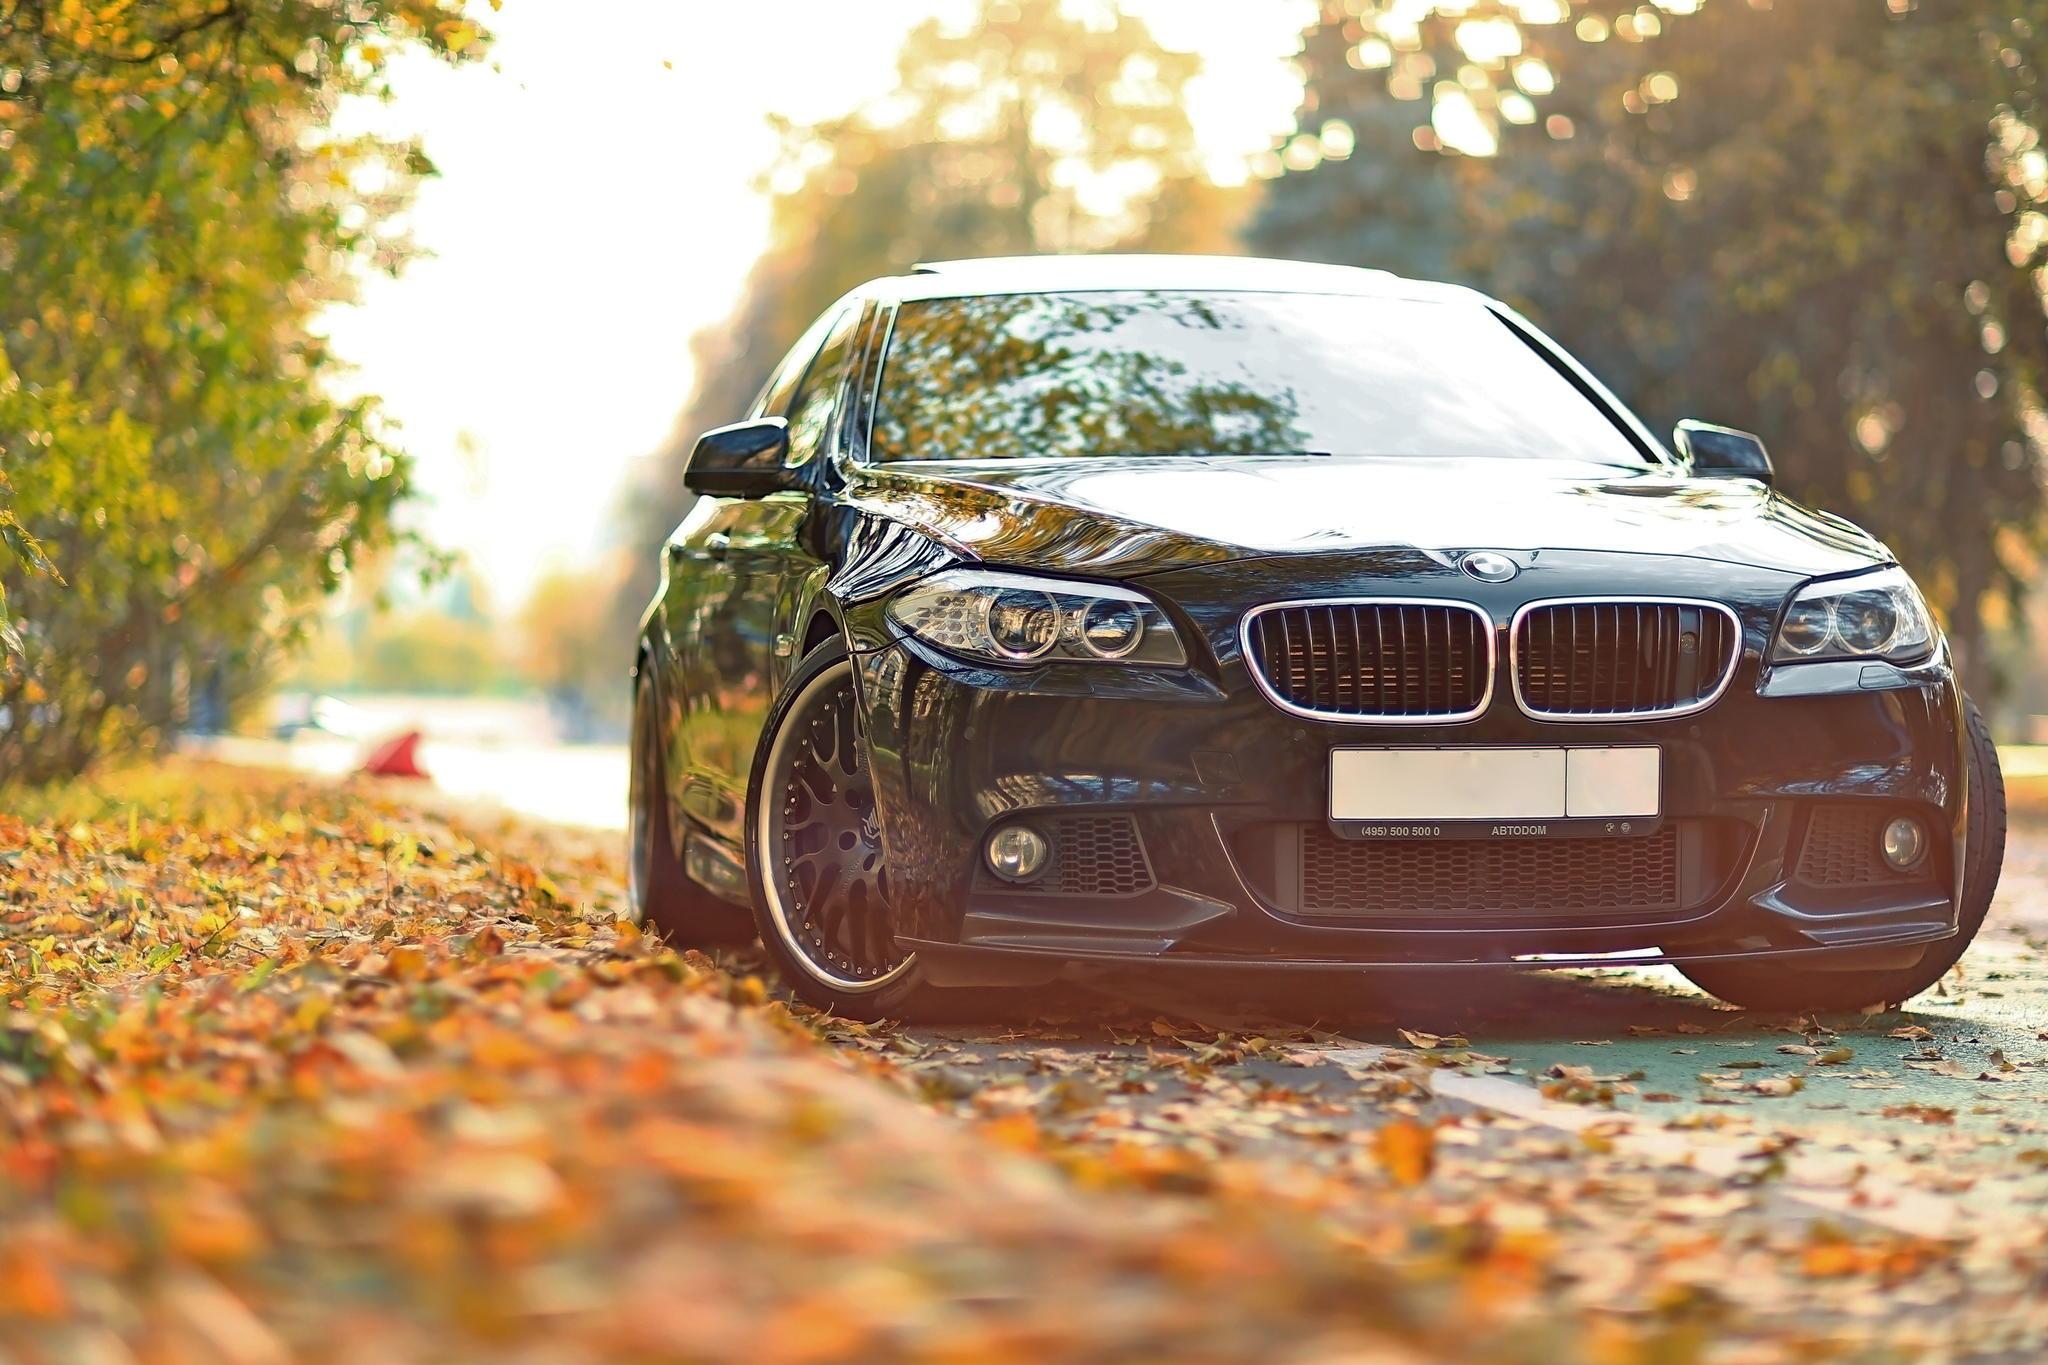 BMW 5 Series HD Wallpaper and Background Image